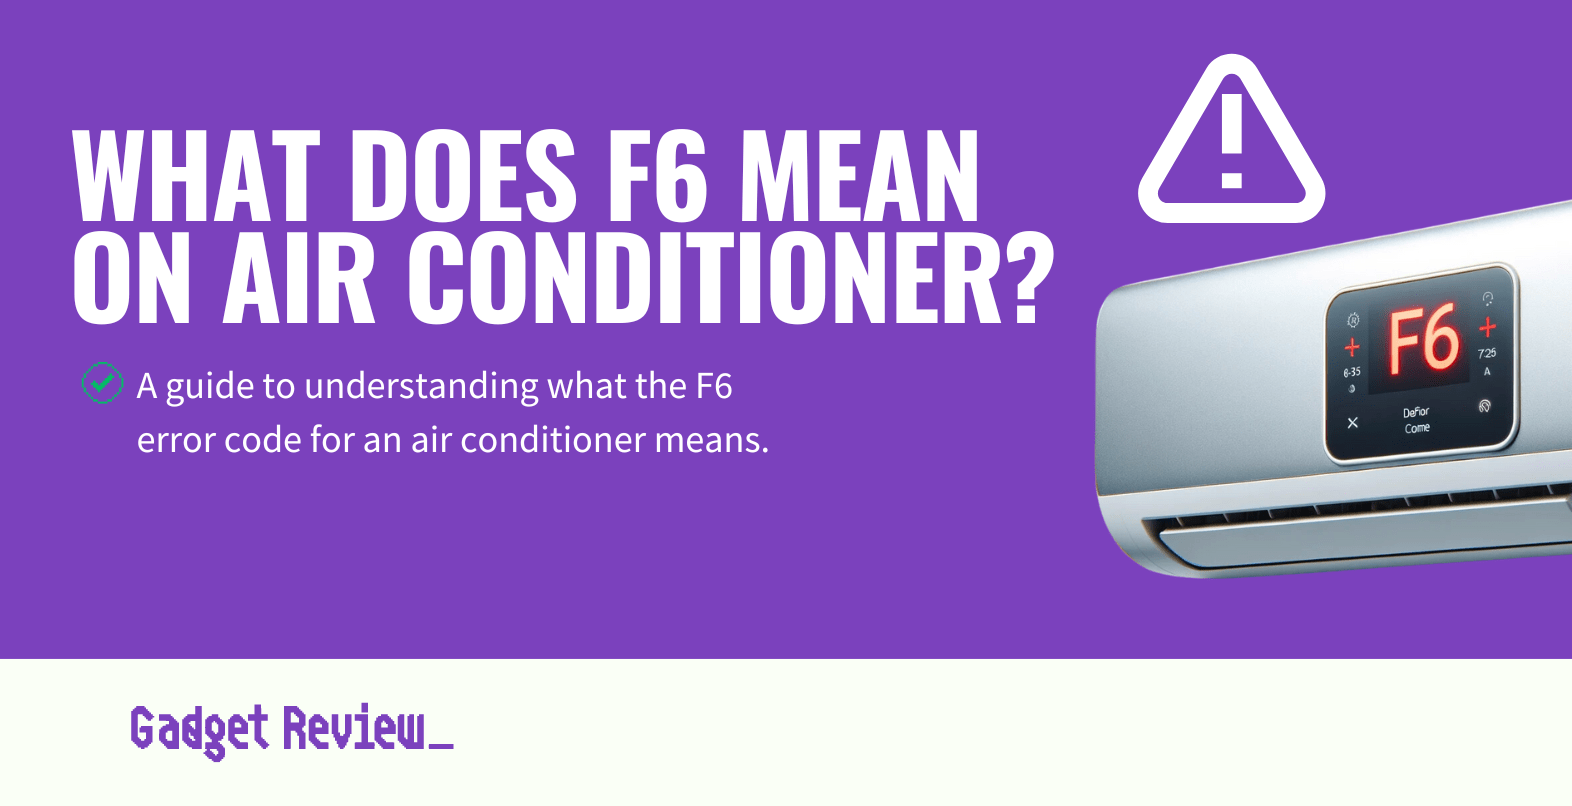 What Does F6 Mean on an Air Conditioner?